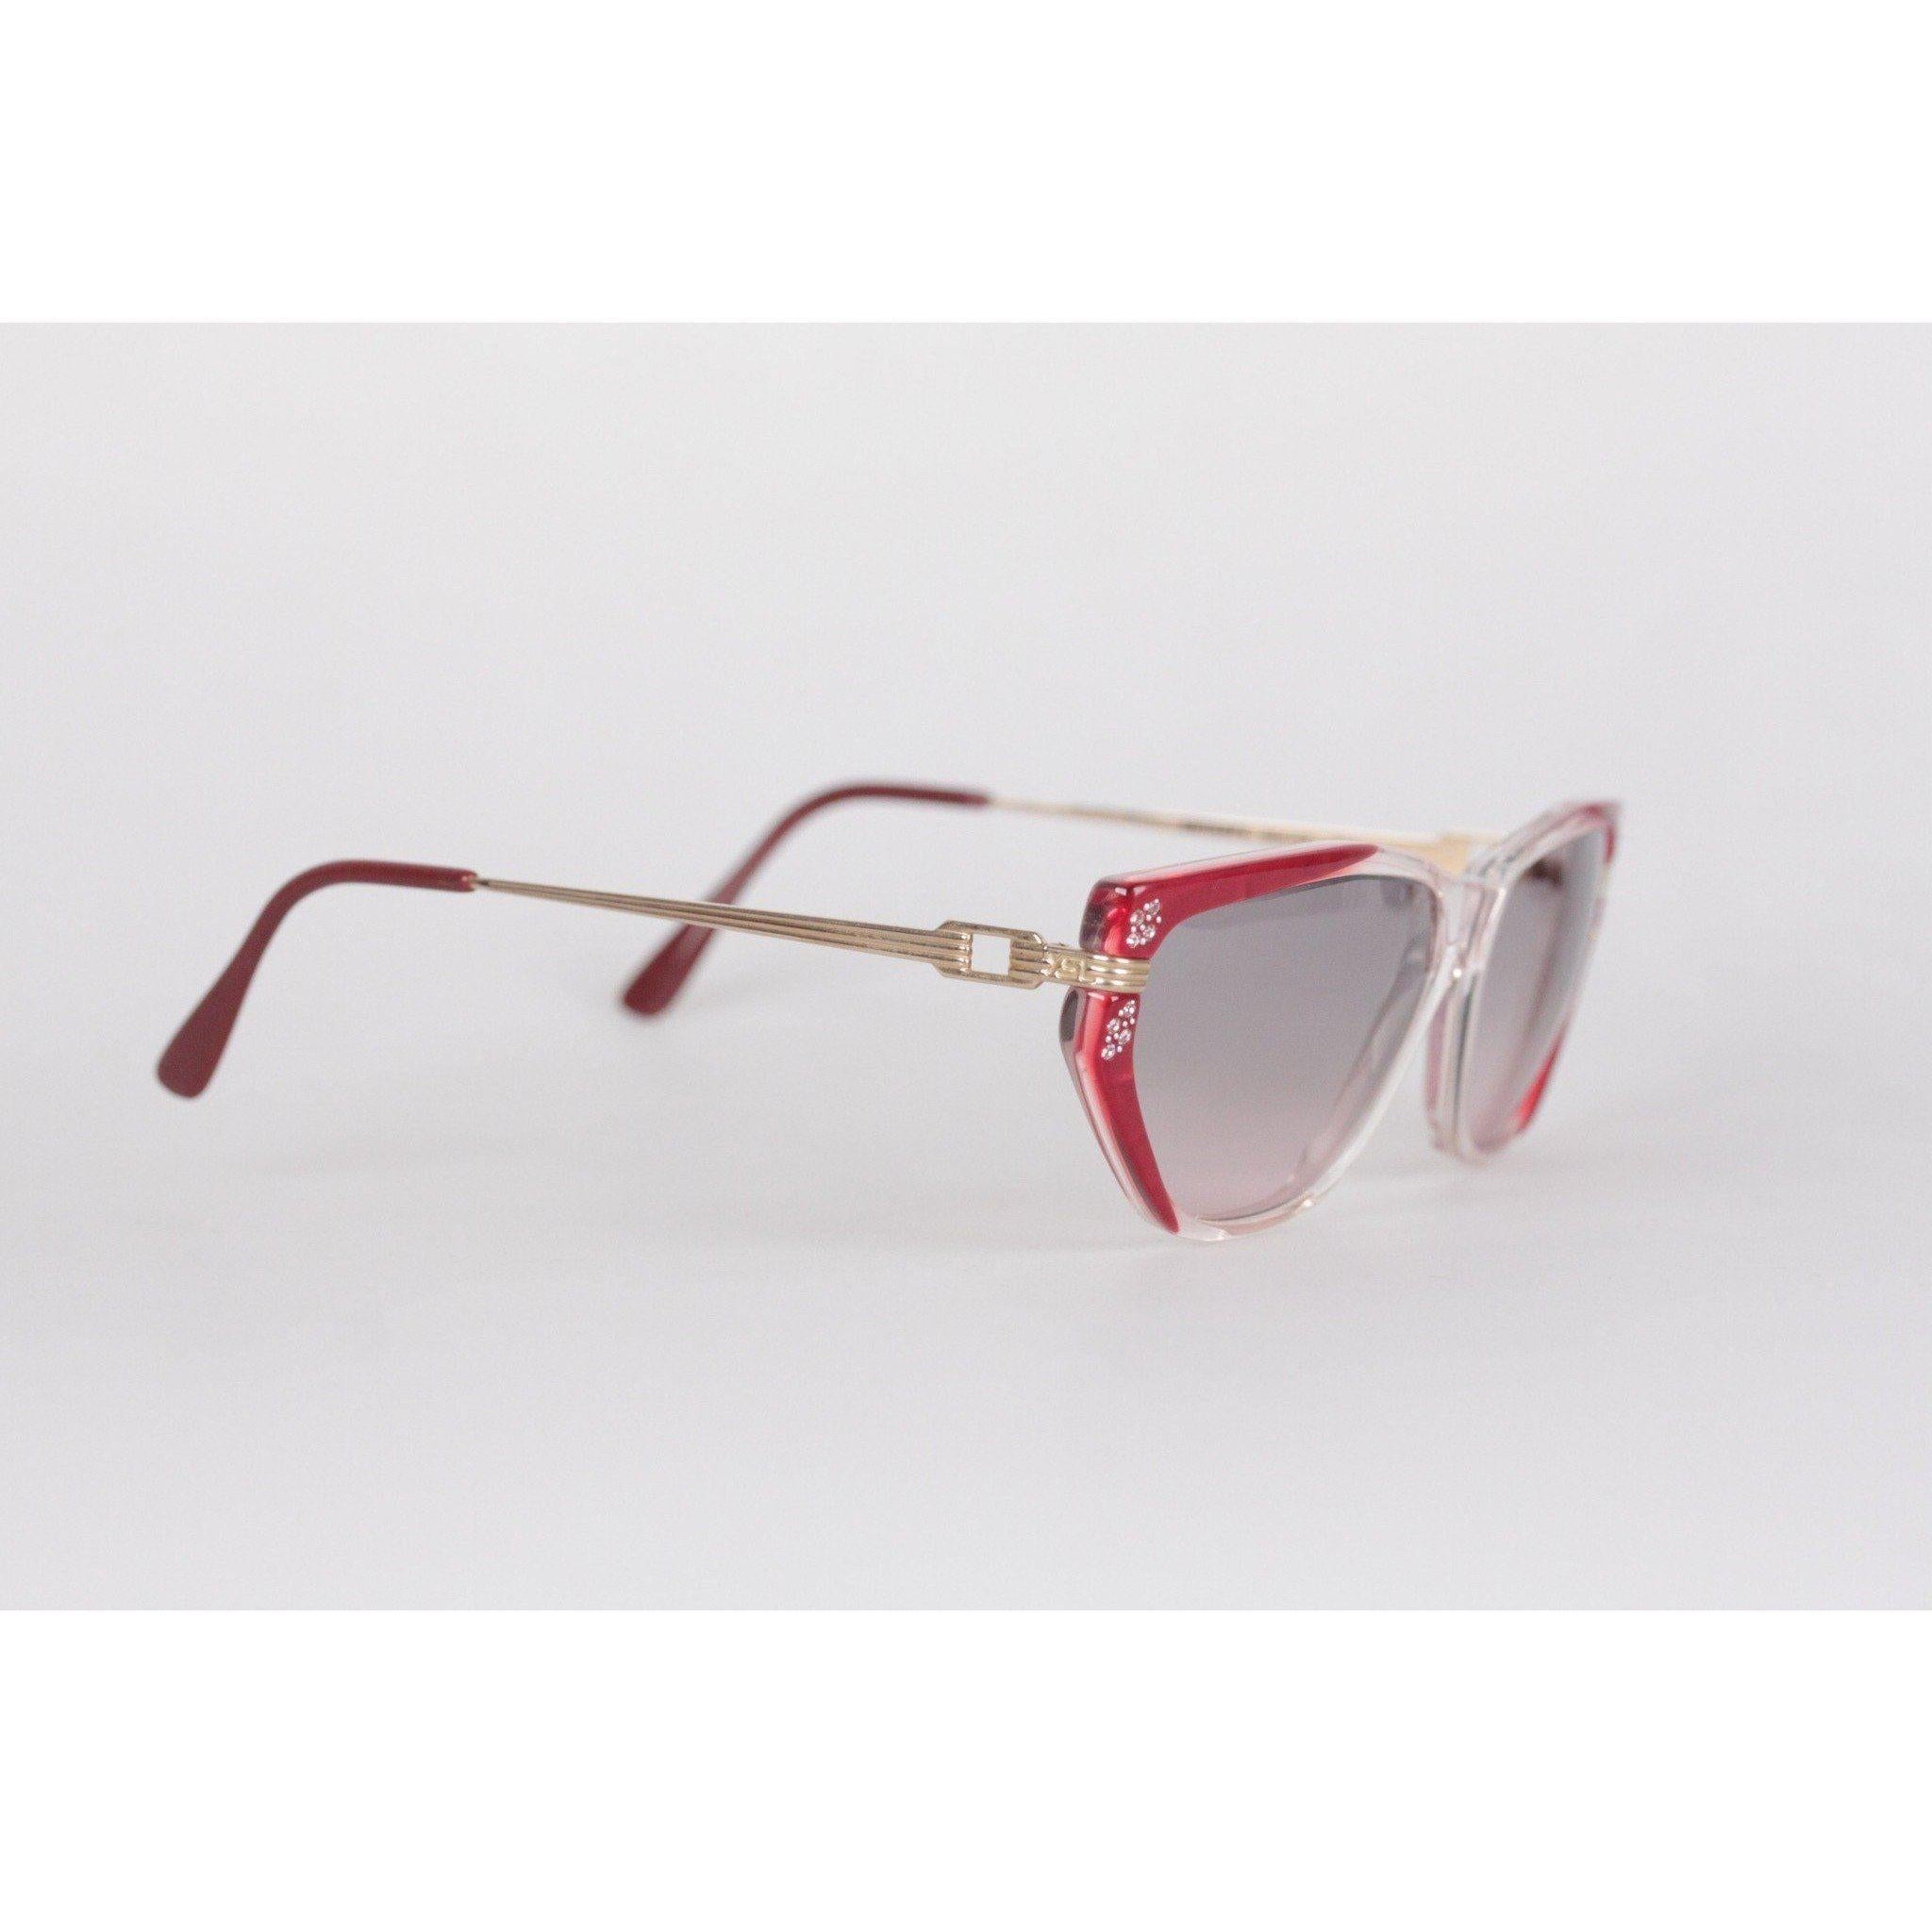 MATERIAL: Acetate, Metal COLOR: Red LENS COLOR: Blue MODEL: Euterpe GENDER: Women SIZE: Medium CONDITION DETAILS: NEW OLD STOCK - Never Worn or Used - They will come with a GENERIC Case MEASUREMENTS: TEMPLE MAX. LENGTH: 140 mm TEMPLE TO TEMPLE - MAX